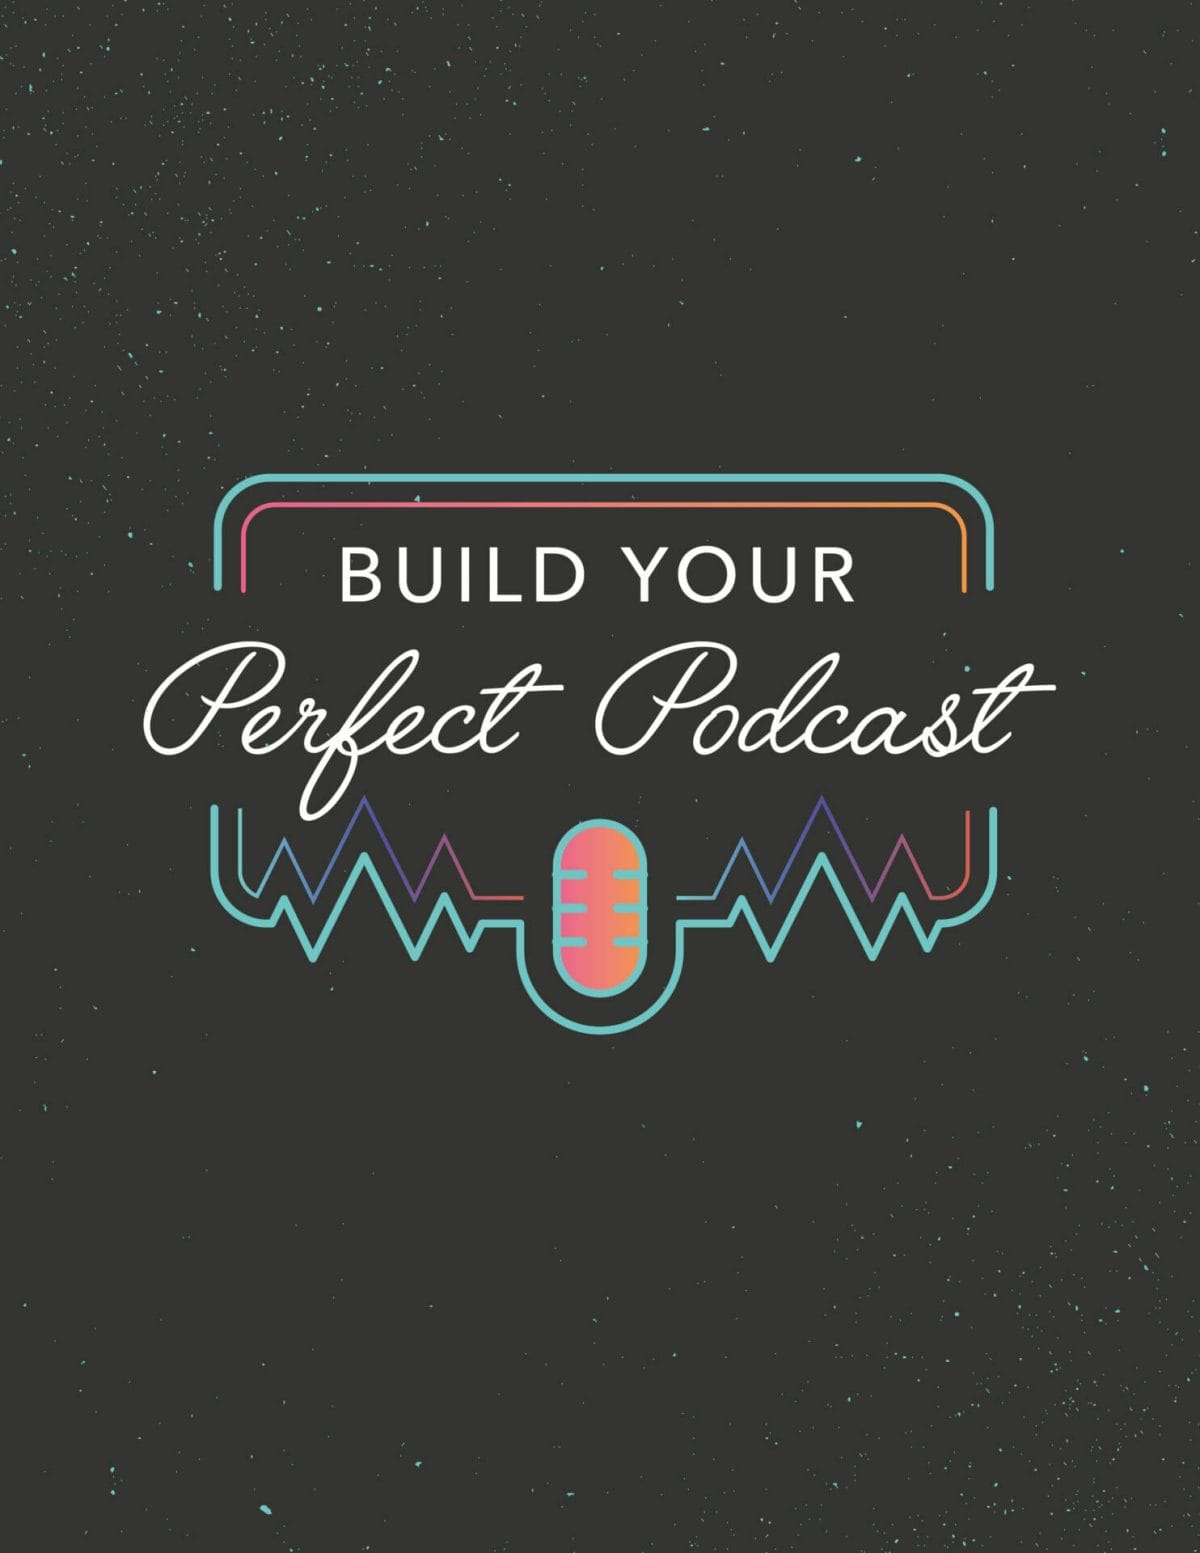 12 build your perfect podcast